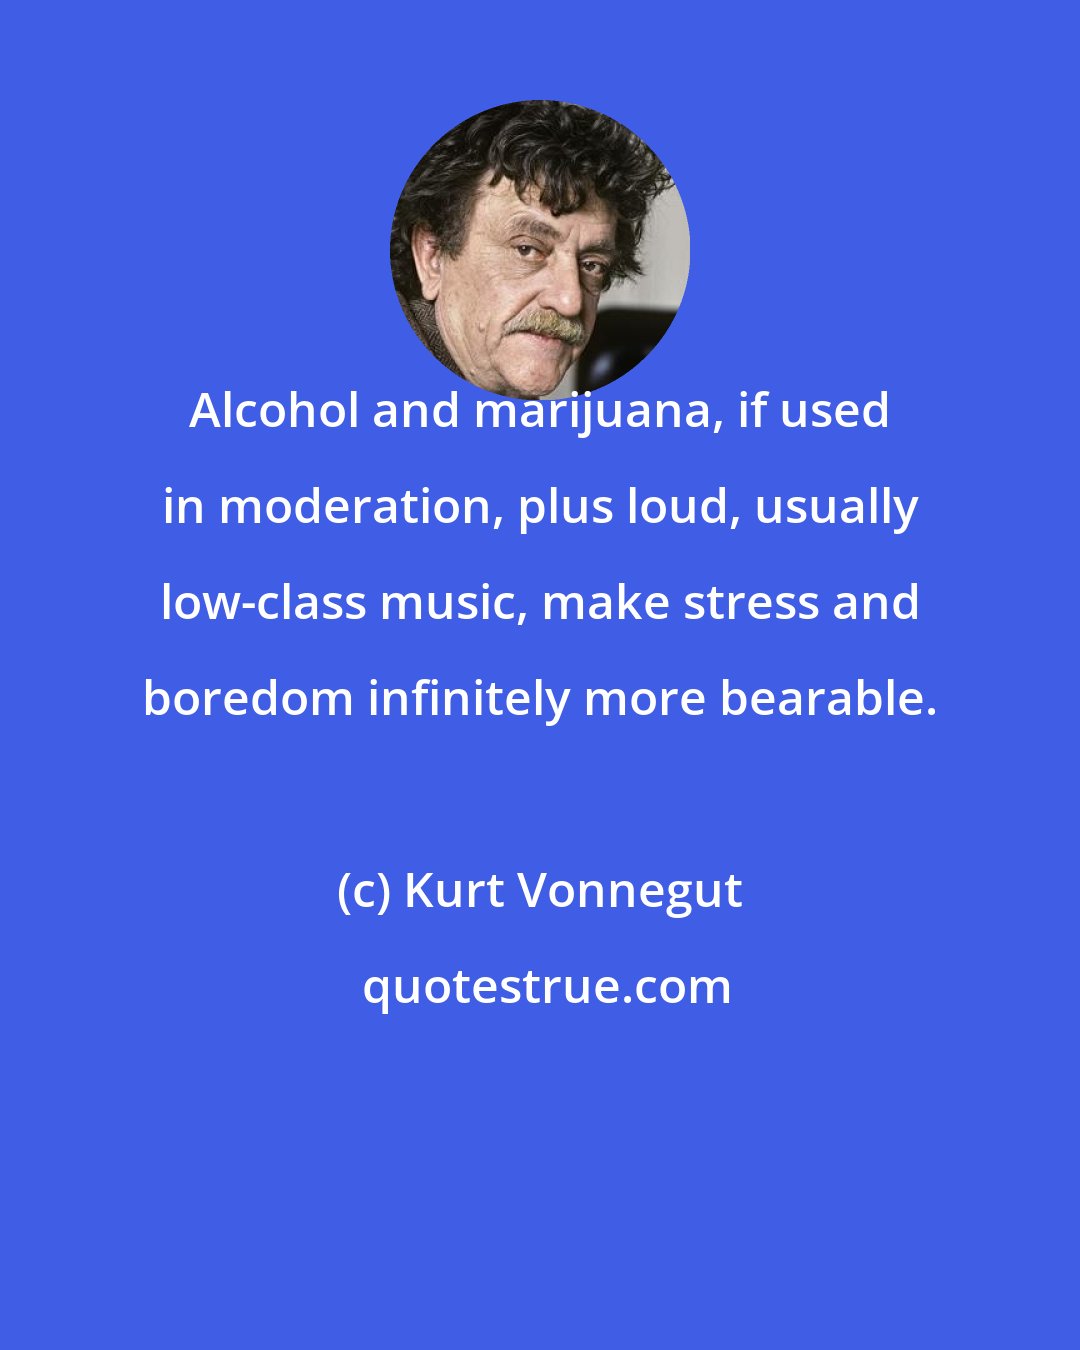 Kurt Vonnegut: Alcohol and marijuana, if used in moderation, plus loud, usually low-class music, make stress and boredom infinitely more bearable.